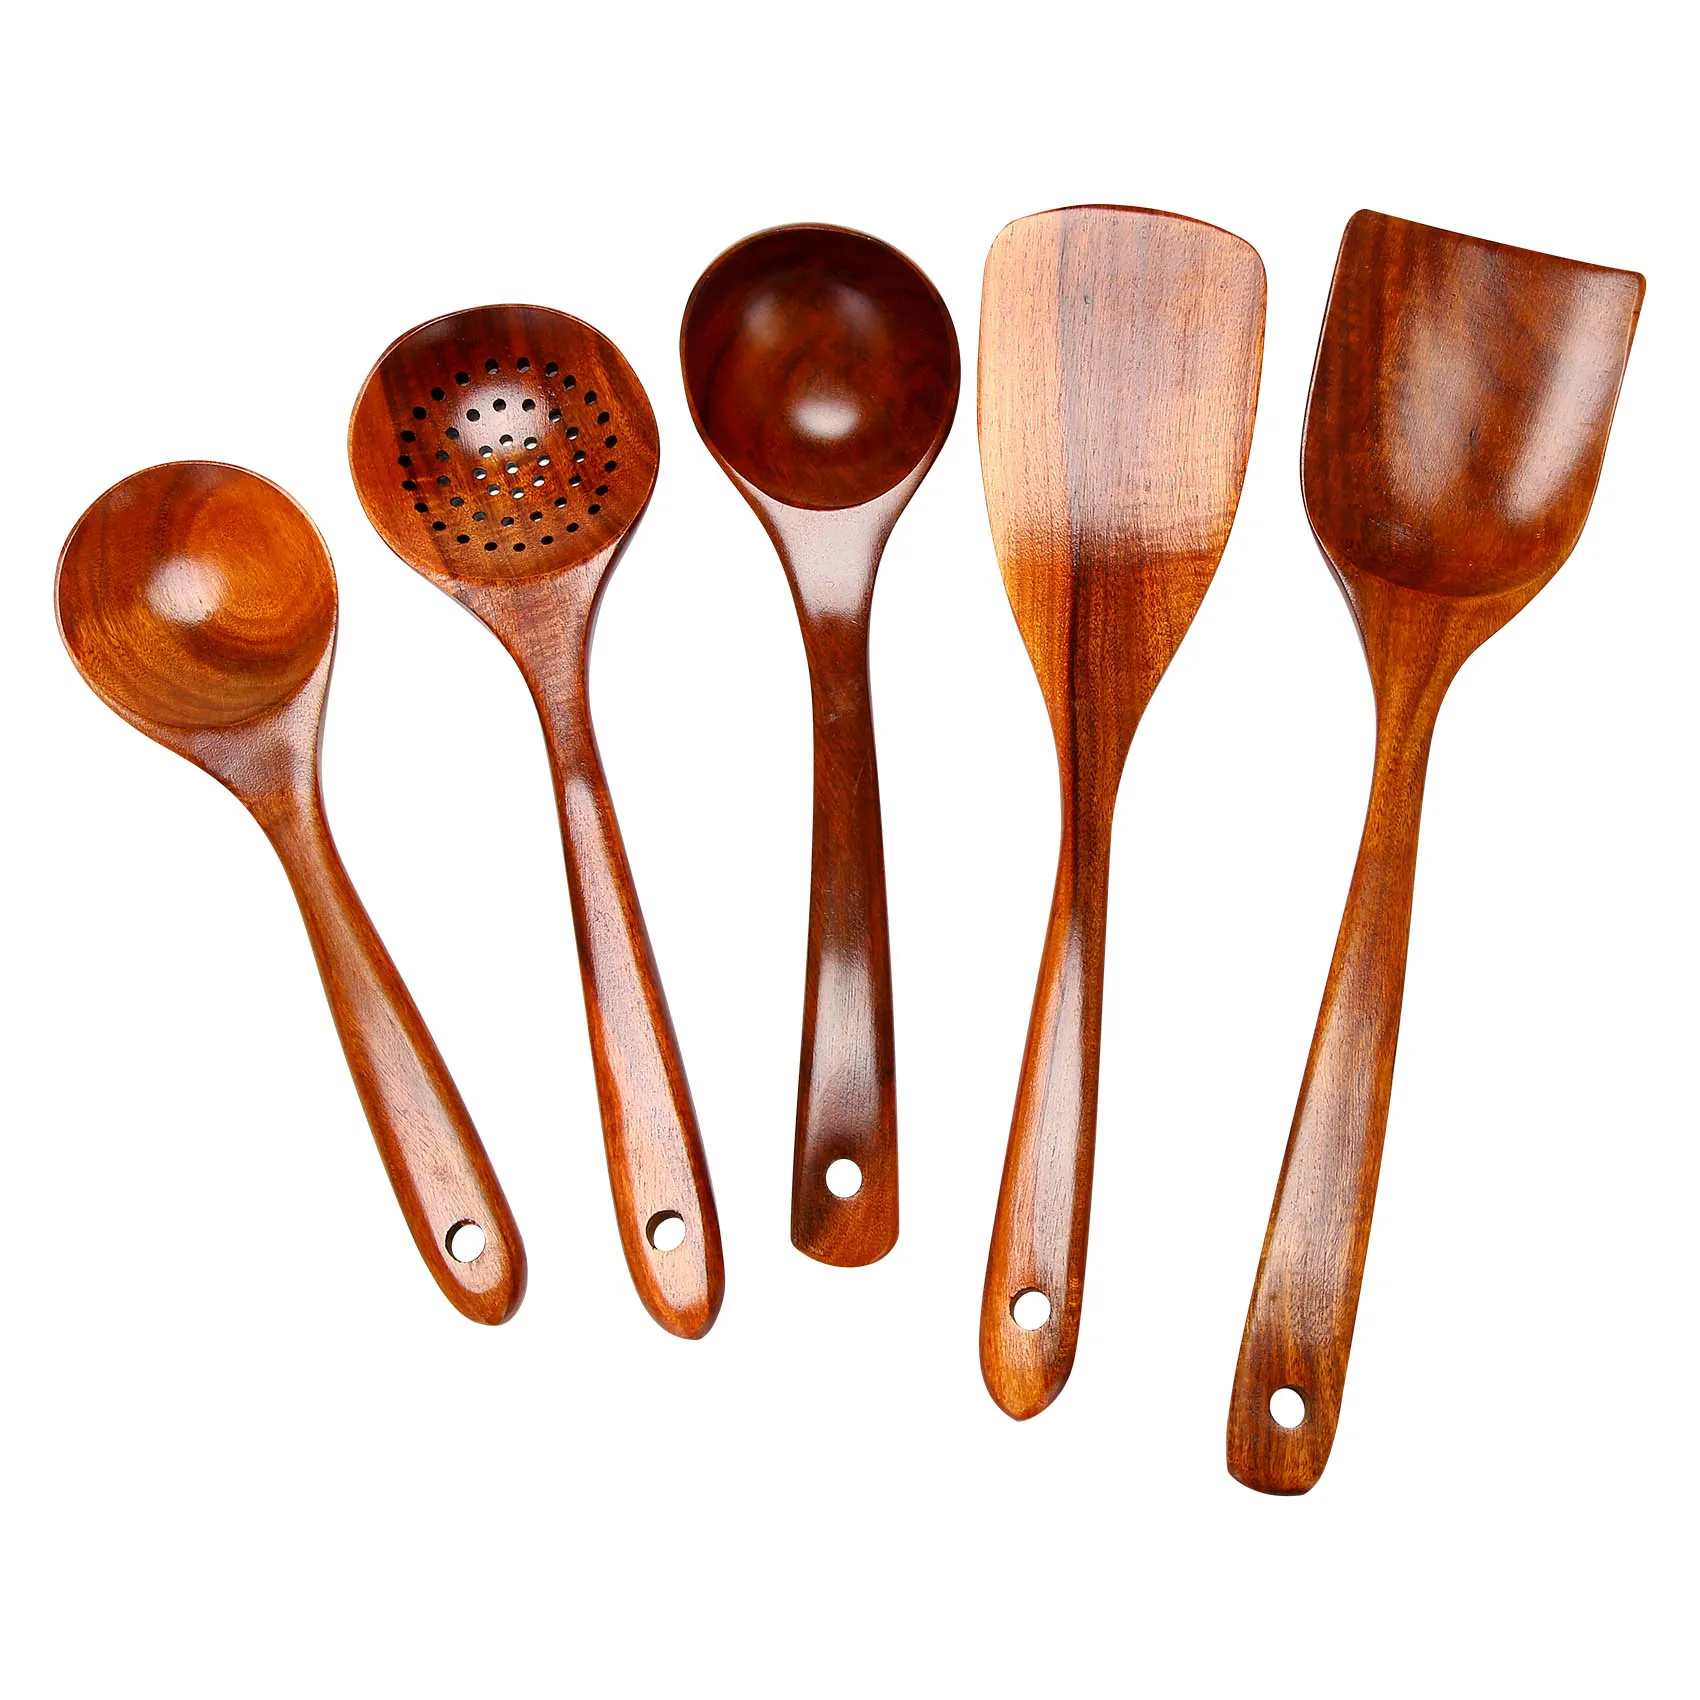 

Wooden Spoons, Wooden Spoons for Cooking, 5-Piece Reusable Wood Kitchen Utensils Set Tools for Cooking Nonstick Cookware